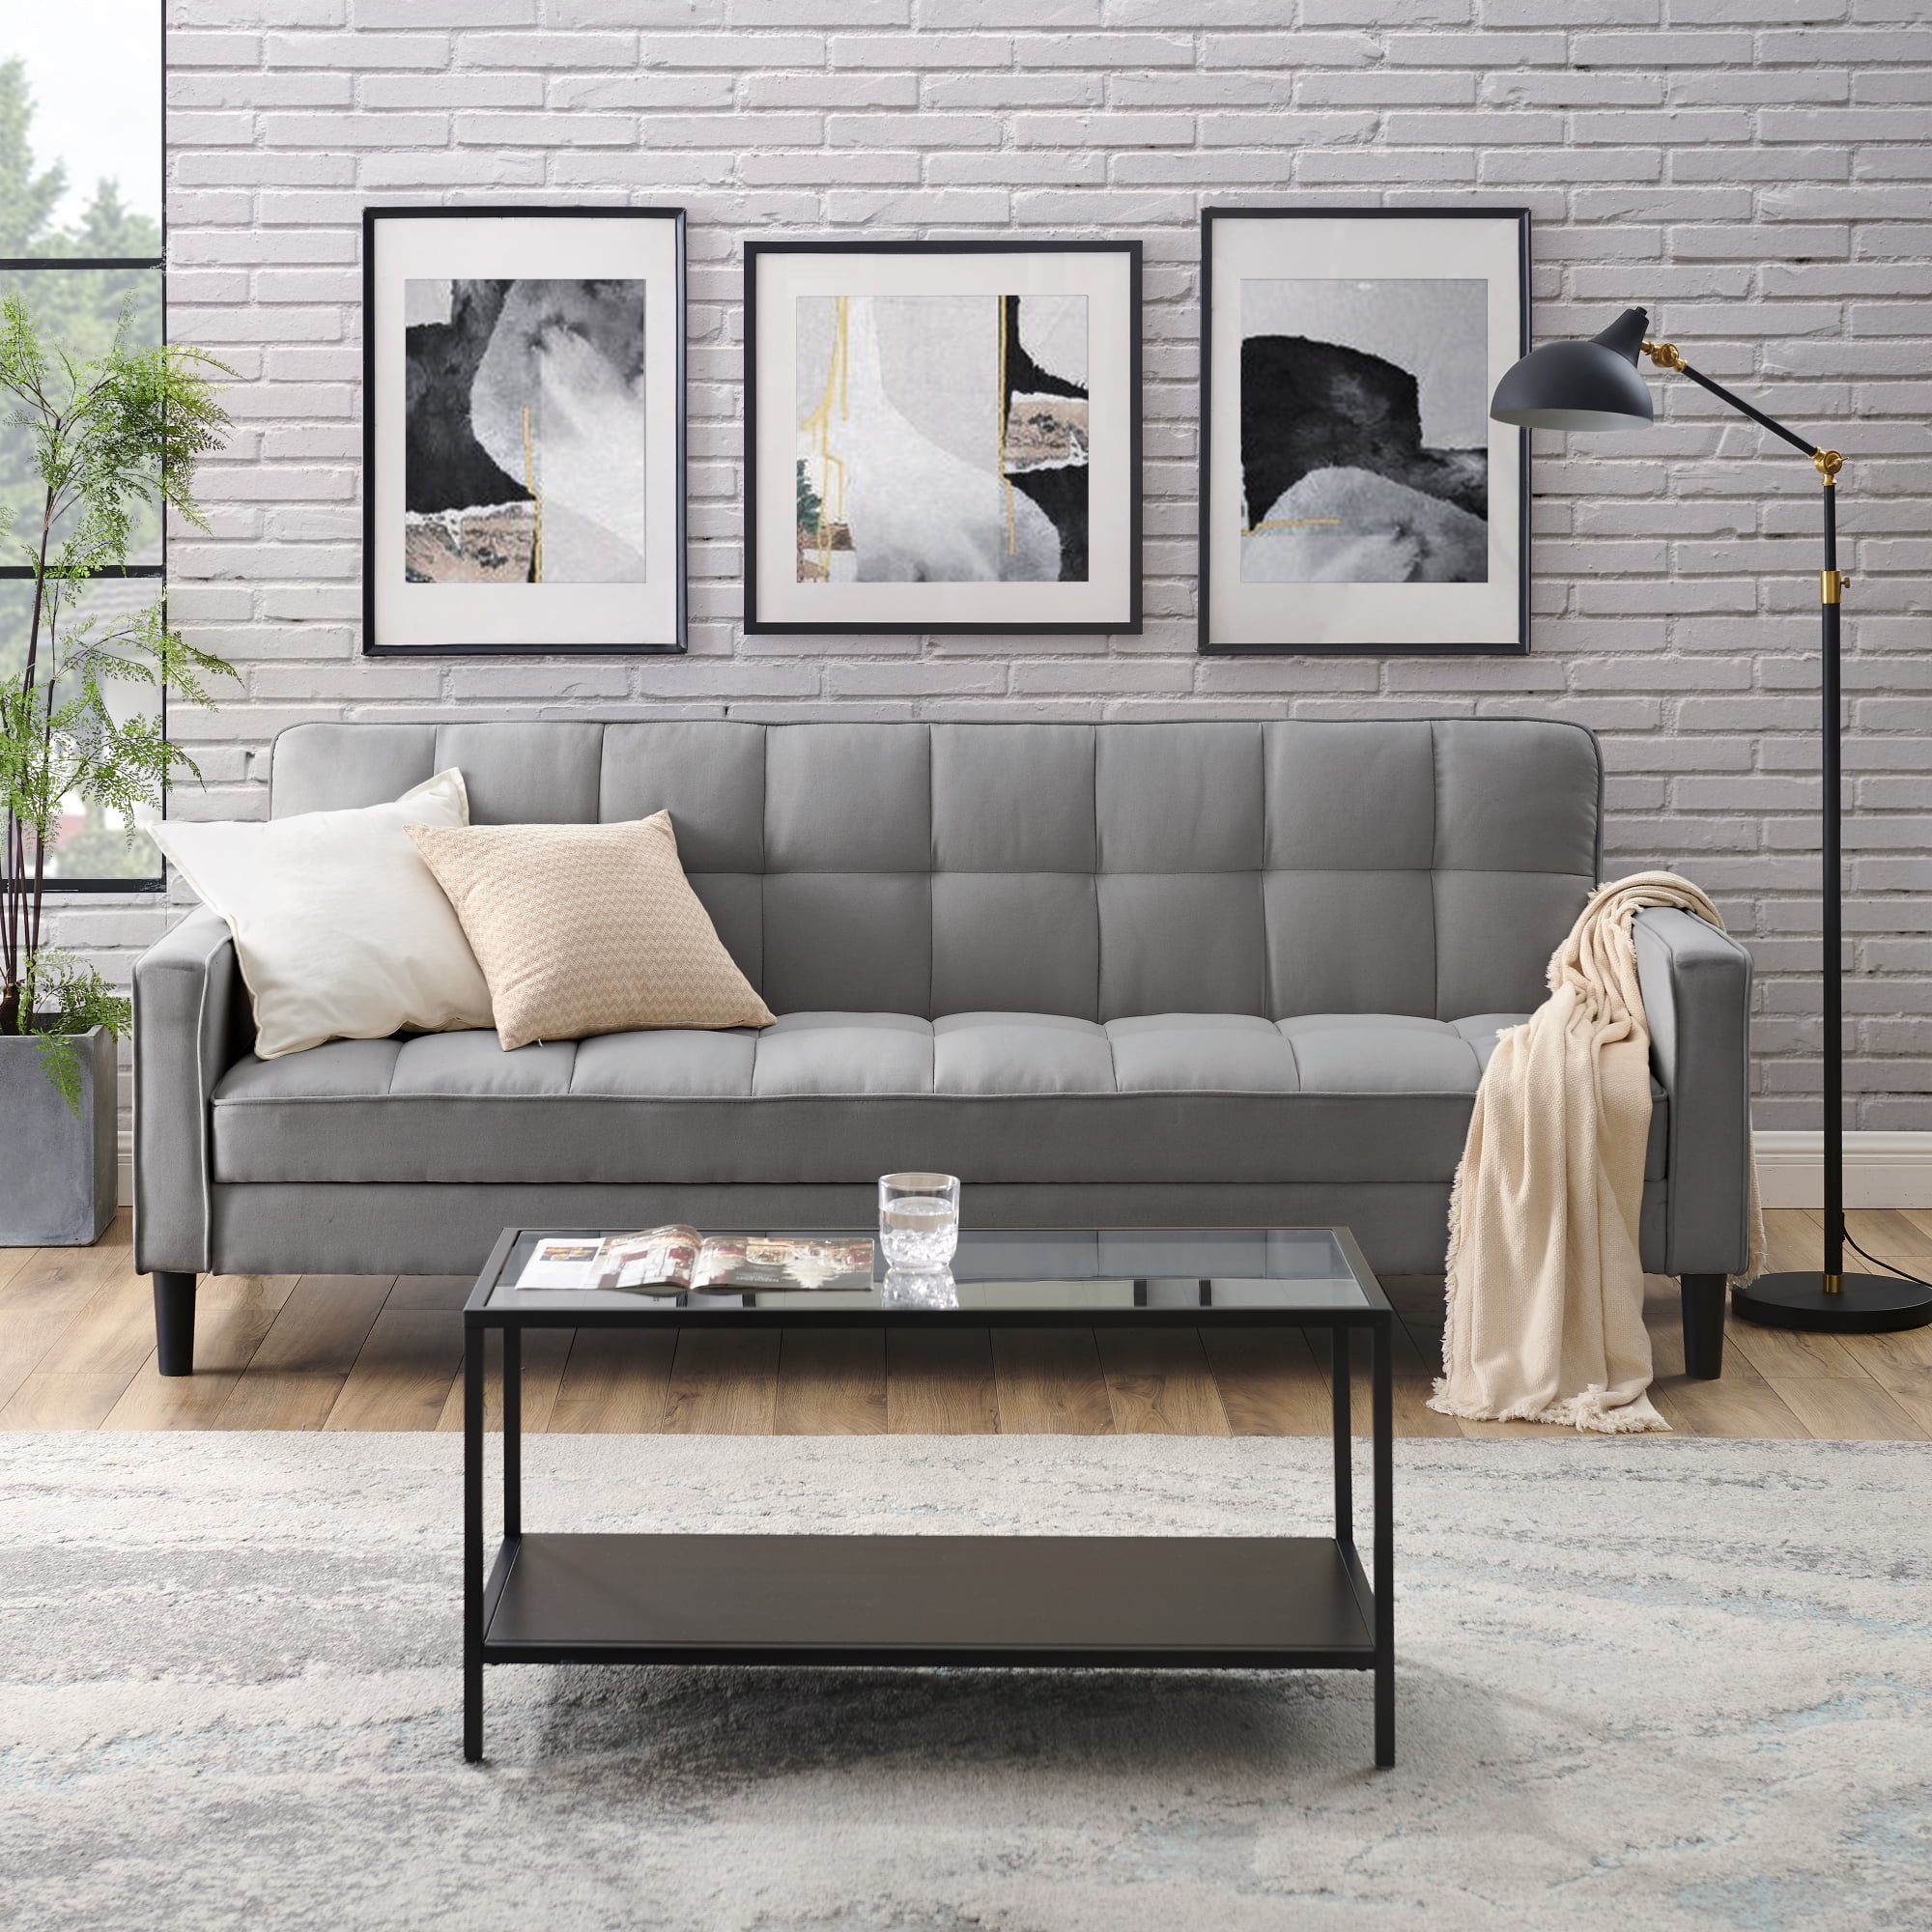 Oswin Light Grey Linen Convertible Sofa Bed – Convertible, Tufted, Storage  85" Wide – Walmart In Light Charcoal Linen Sofas (View 6 of 15)